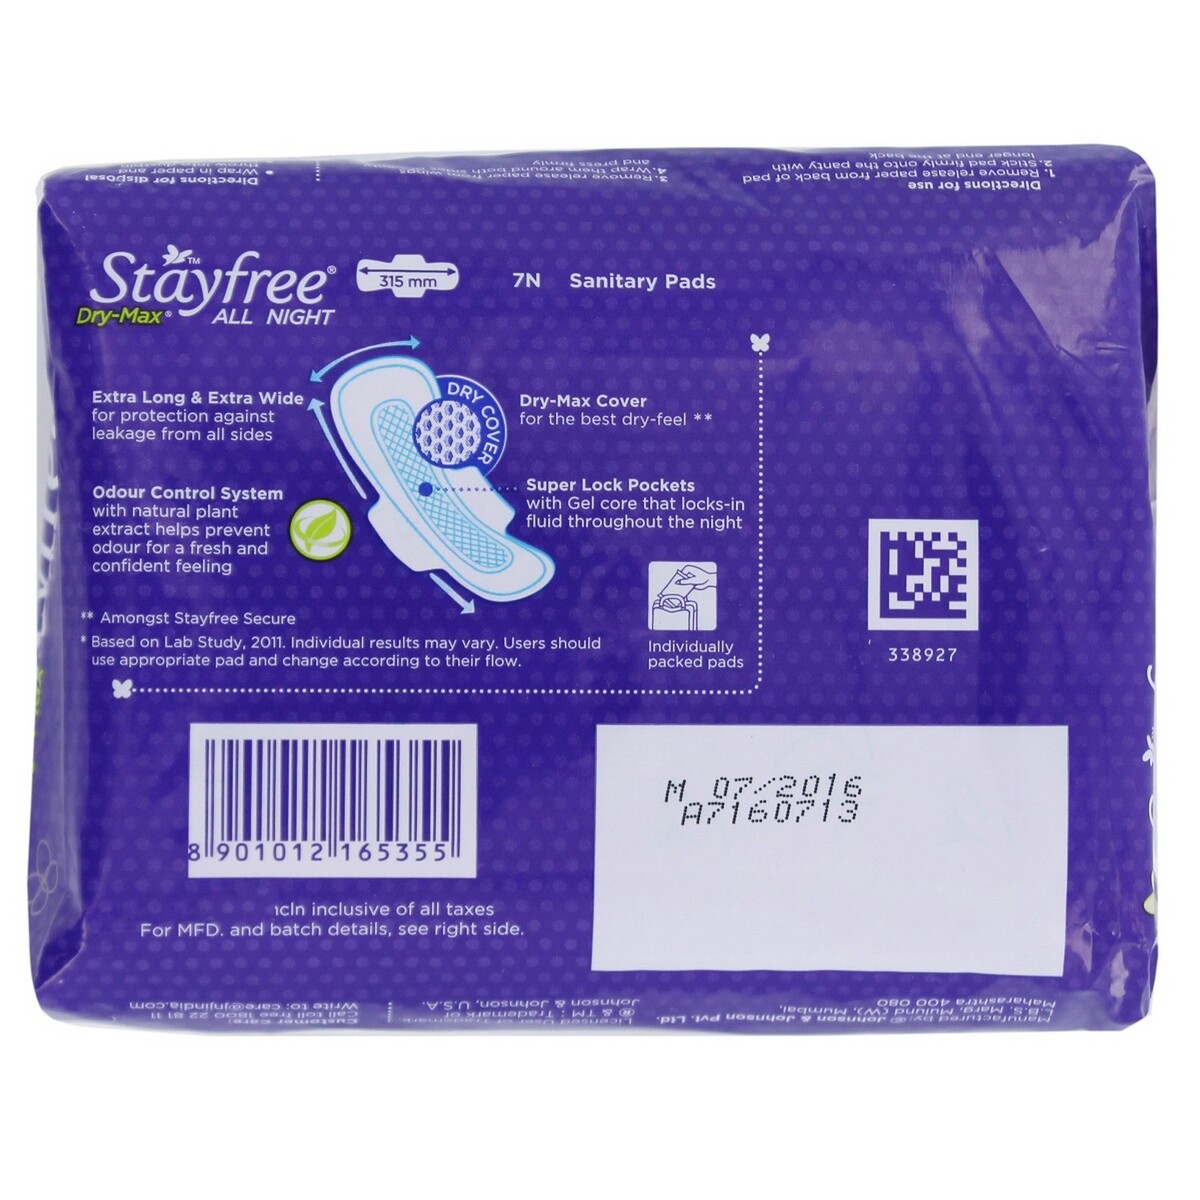 Stayfree UltraThin Dry-Max All Nights 7's